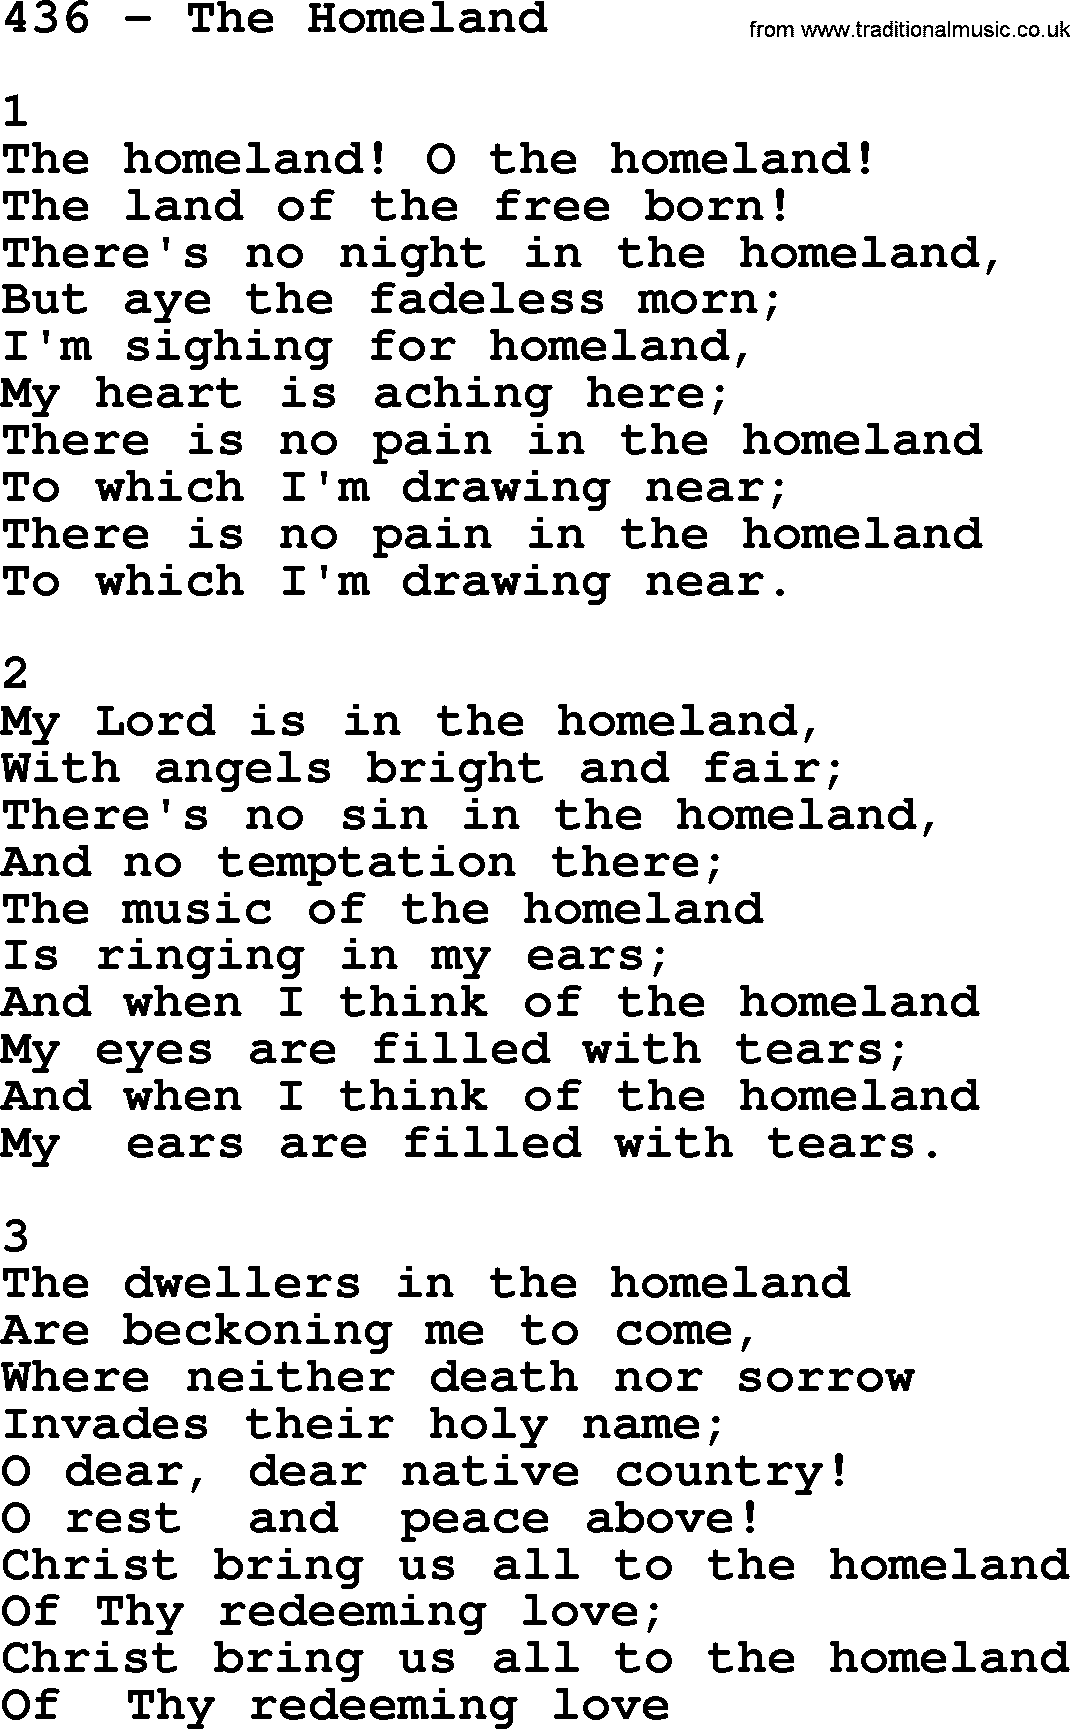 Complete Adventis Hymnal, title: 436-The Homeland, with lyrics, midi, mp3, powerpoints(PPT) and PDF,